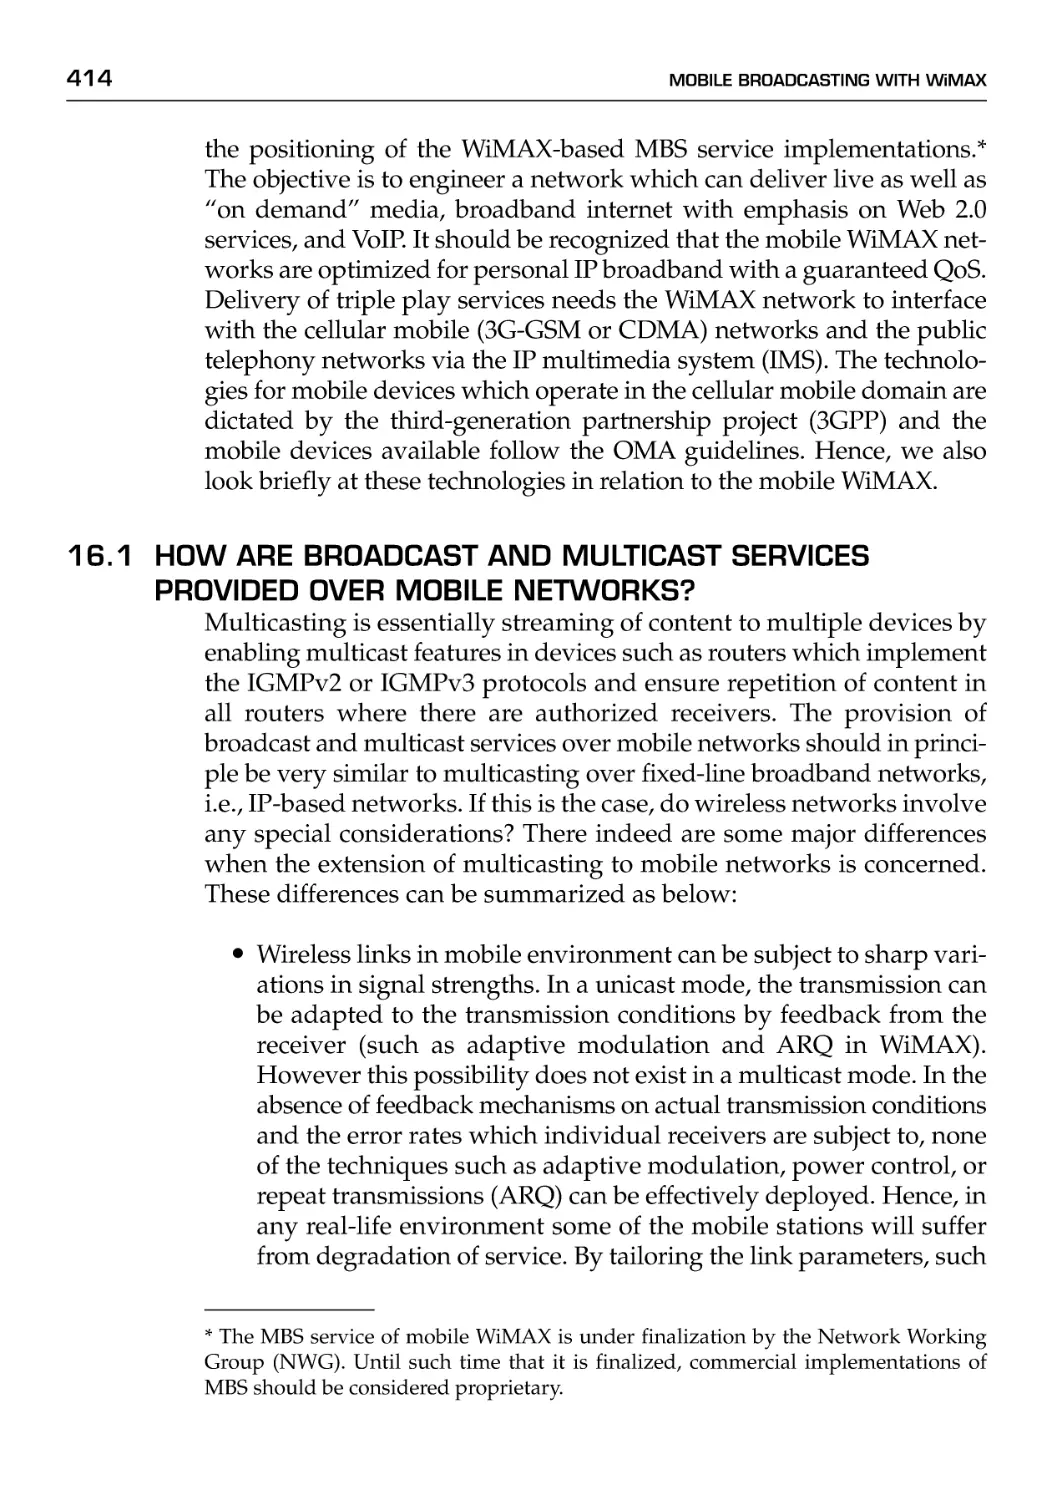 16.1 How Are Broadcast and Multicast Services Provided over Mobile Networks?